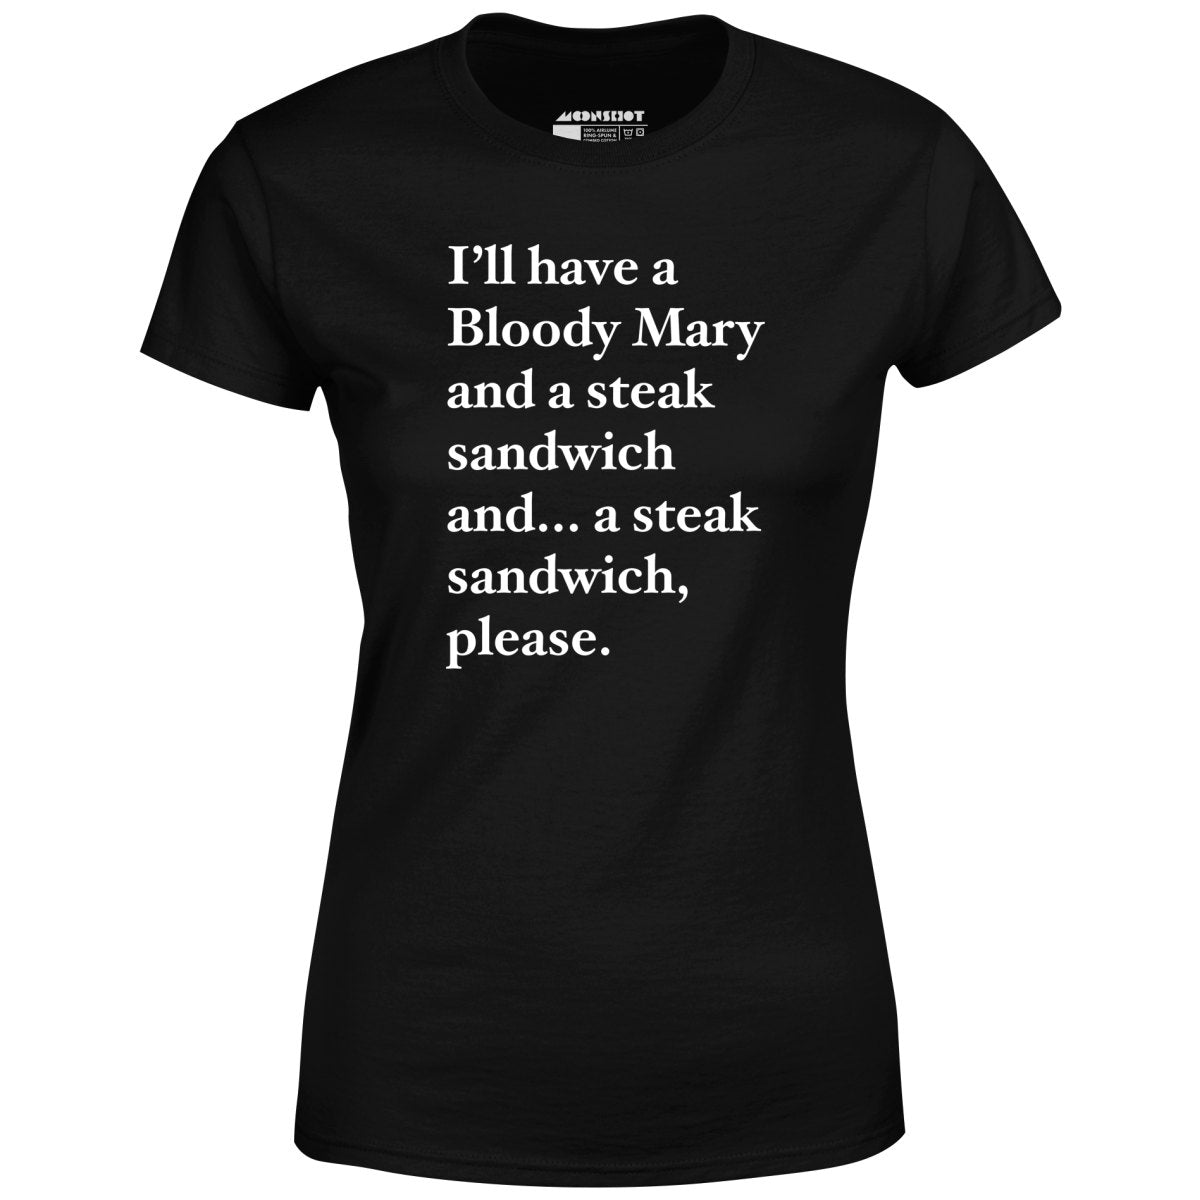 Bloody Mary and a Steak Sandwich - Women's T-Shirt